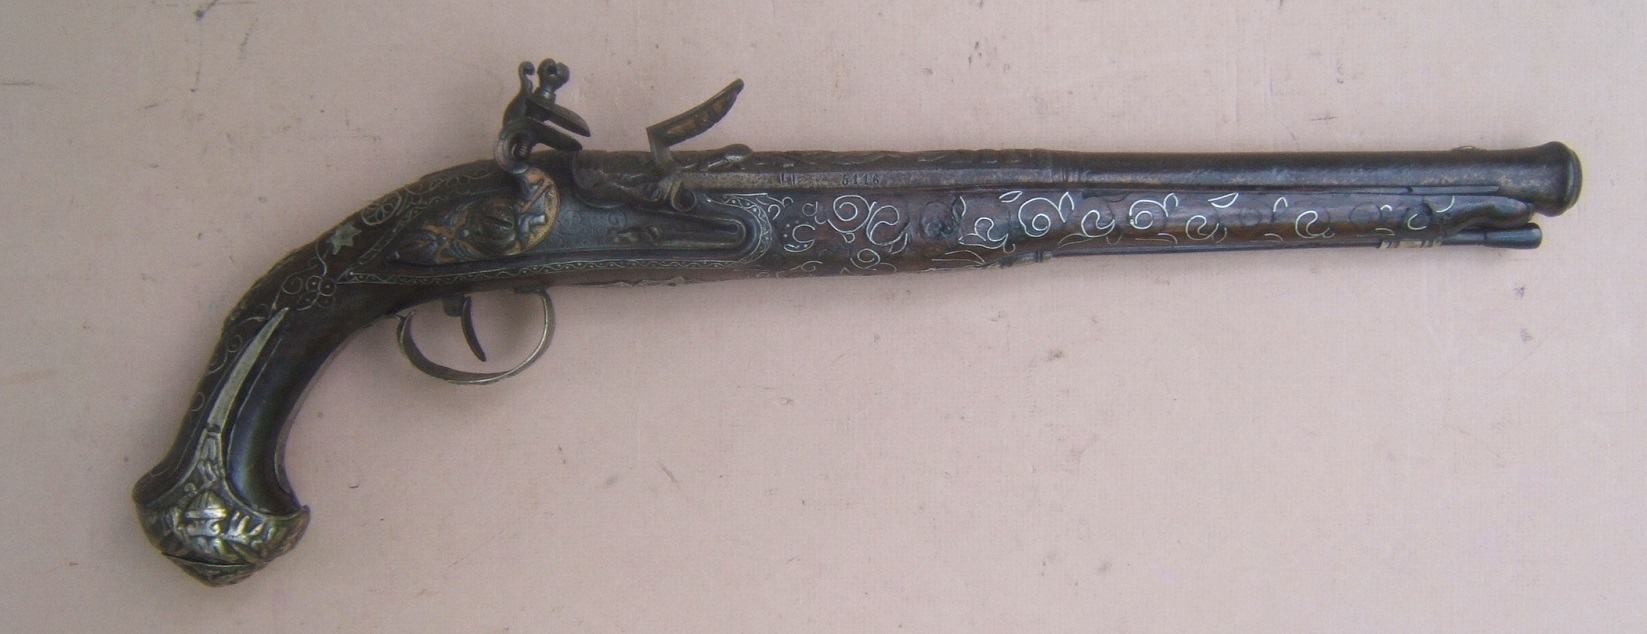 A VERY FINE QUALITY FRENCH SILVER MOUNTED & GOLD DAMASCENED FLINTLOCK HOLSTER PISTOL, by PEYRTE DUMAREST (FOR EASTERN/TURKISH MARKET, ca. 1780 view 1